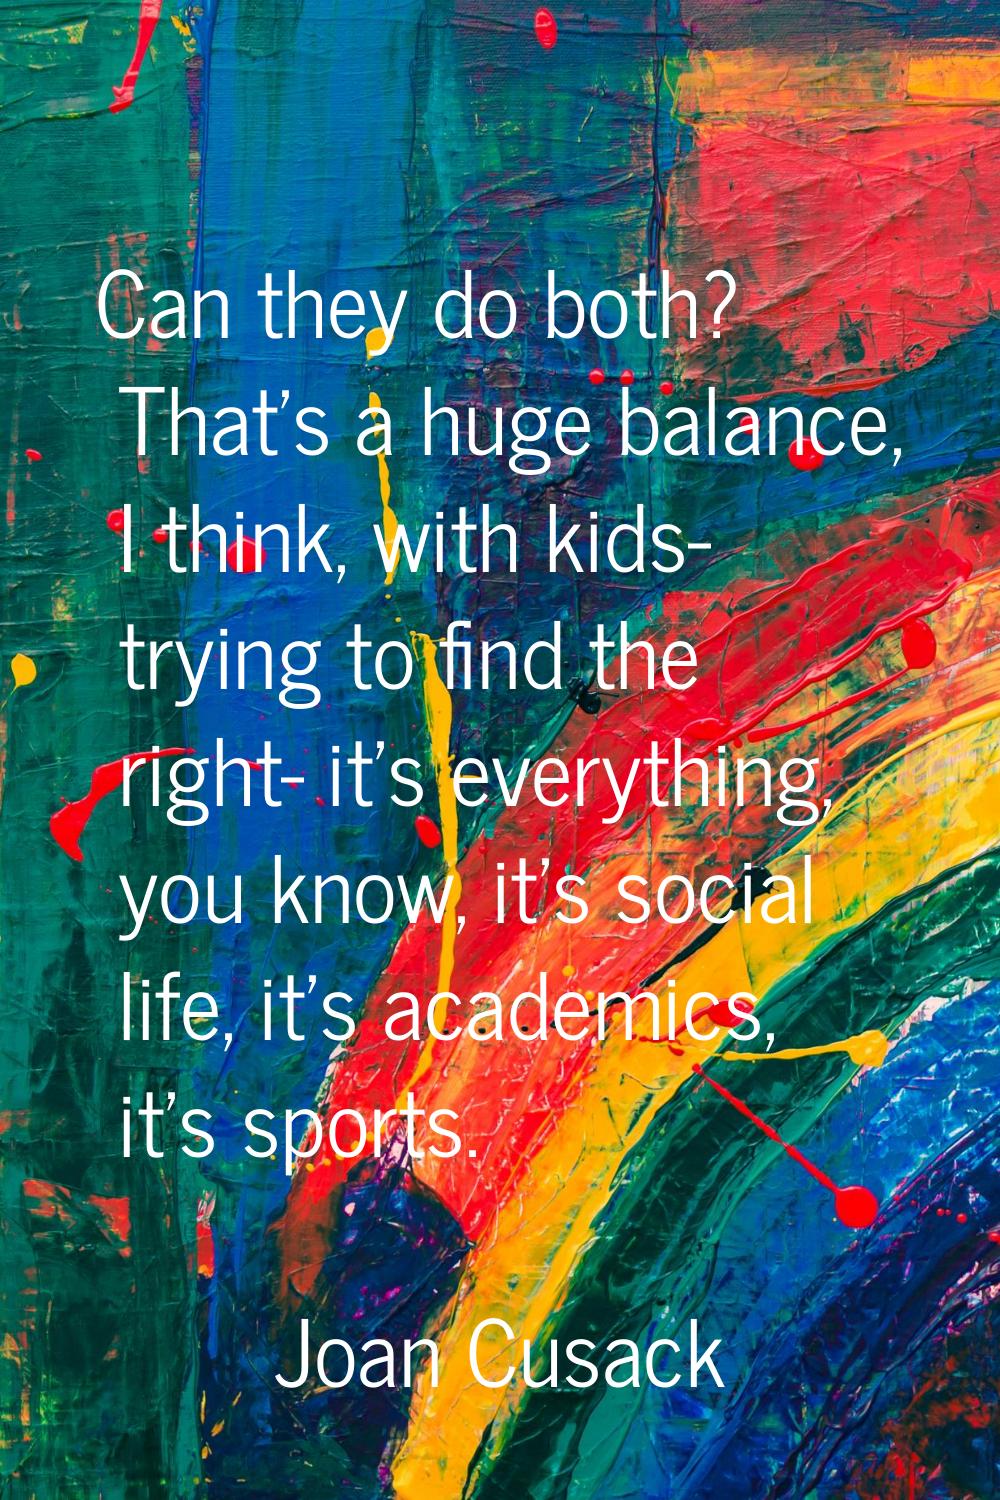 Can they do both? That's a huge balance, I think, with kids- trying to find the right- it's everyth